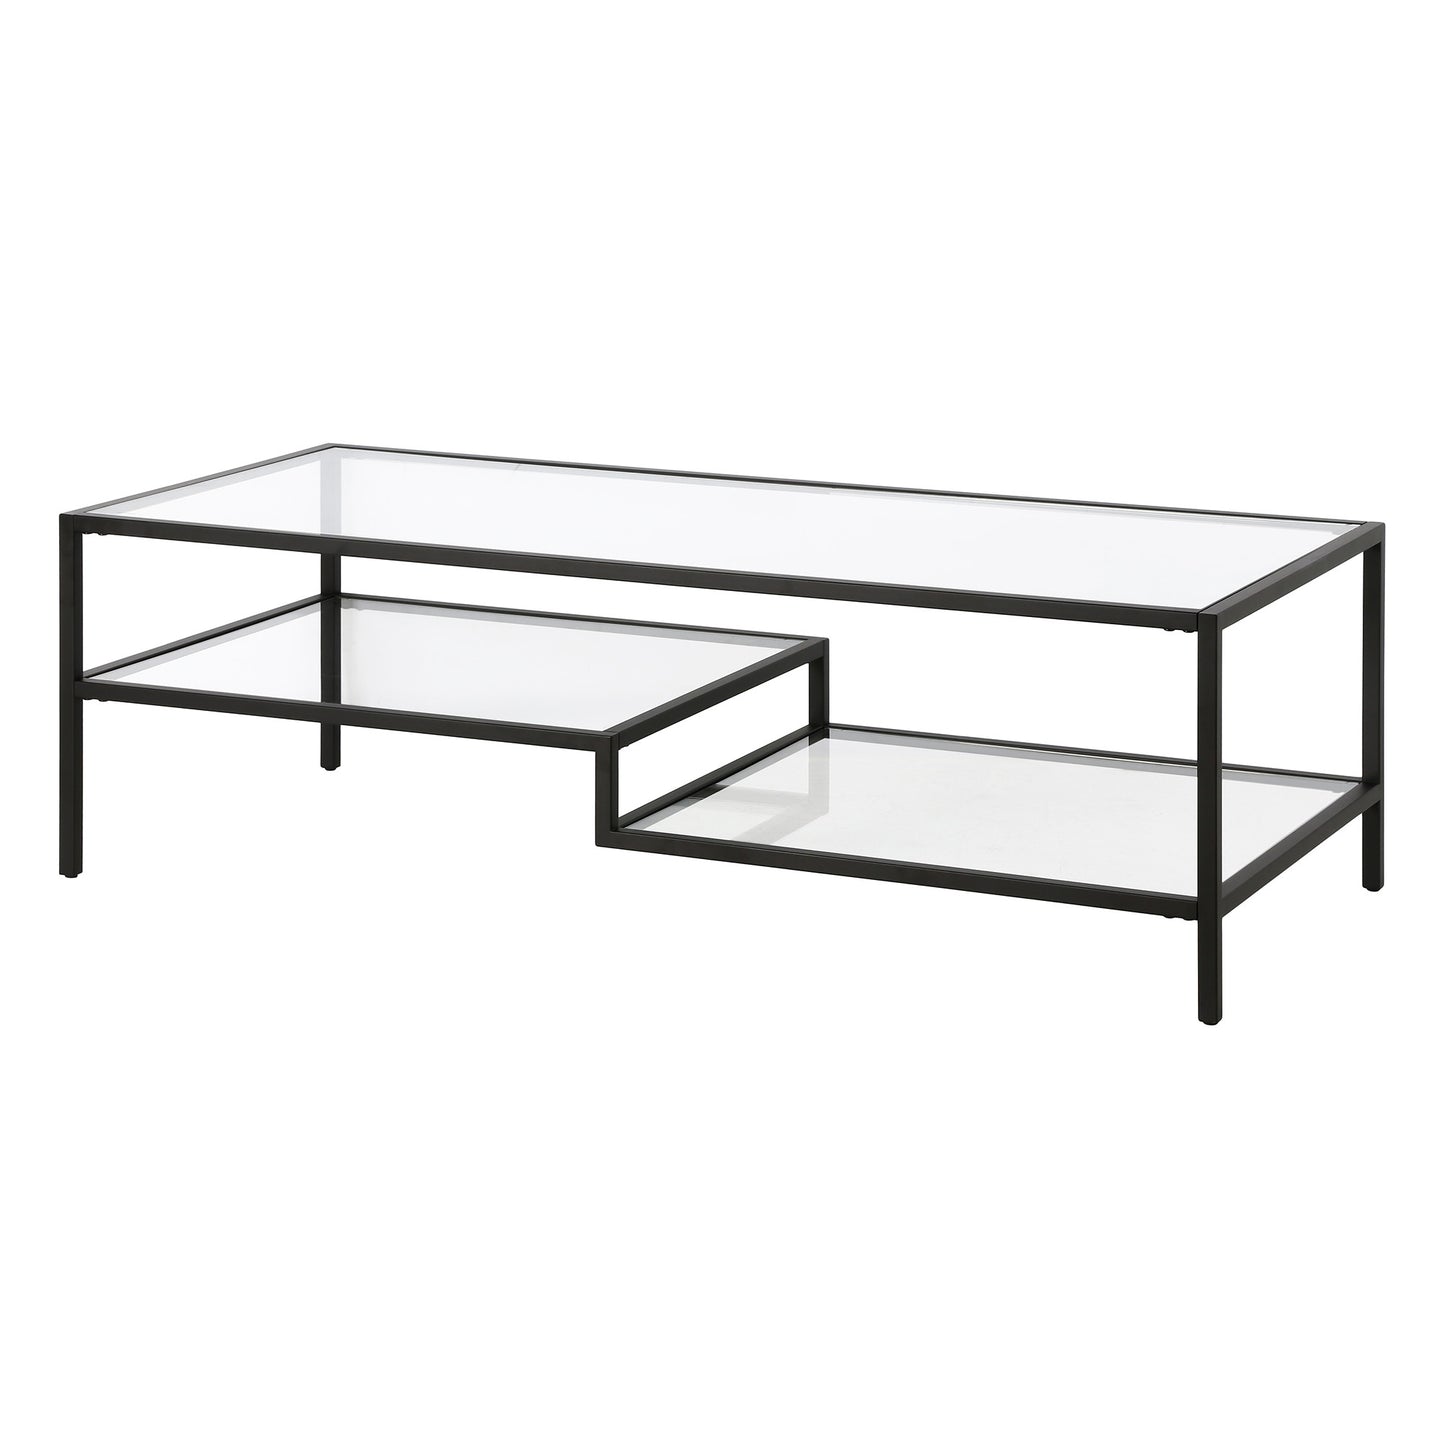 54" Black Glass And Steel Coffee Table With Two Shelves